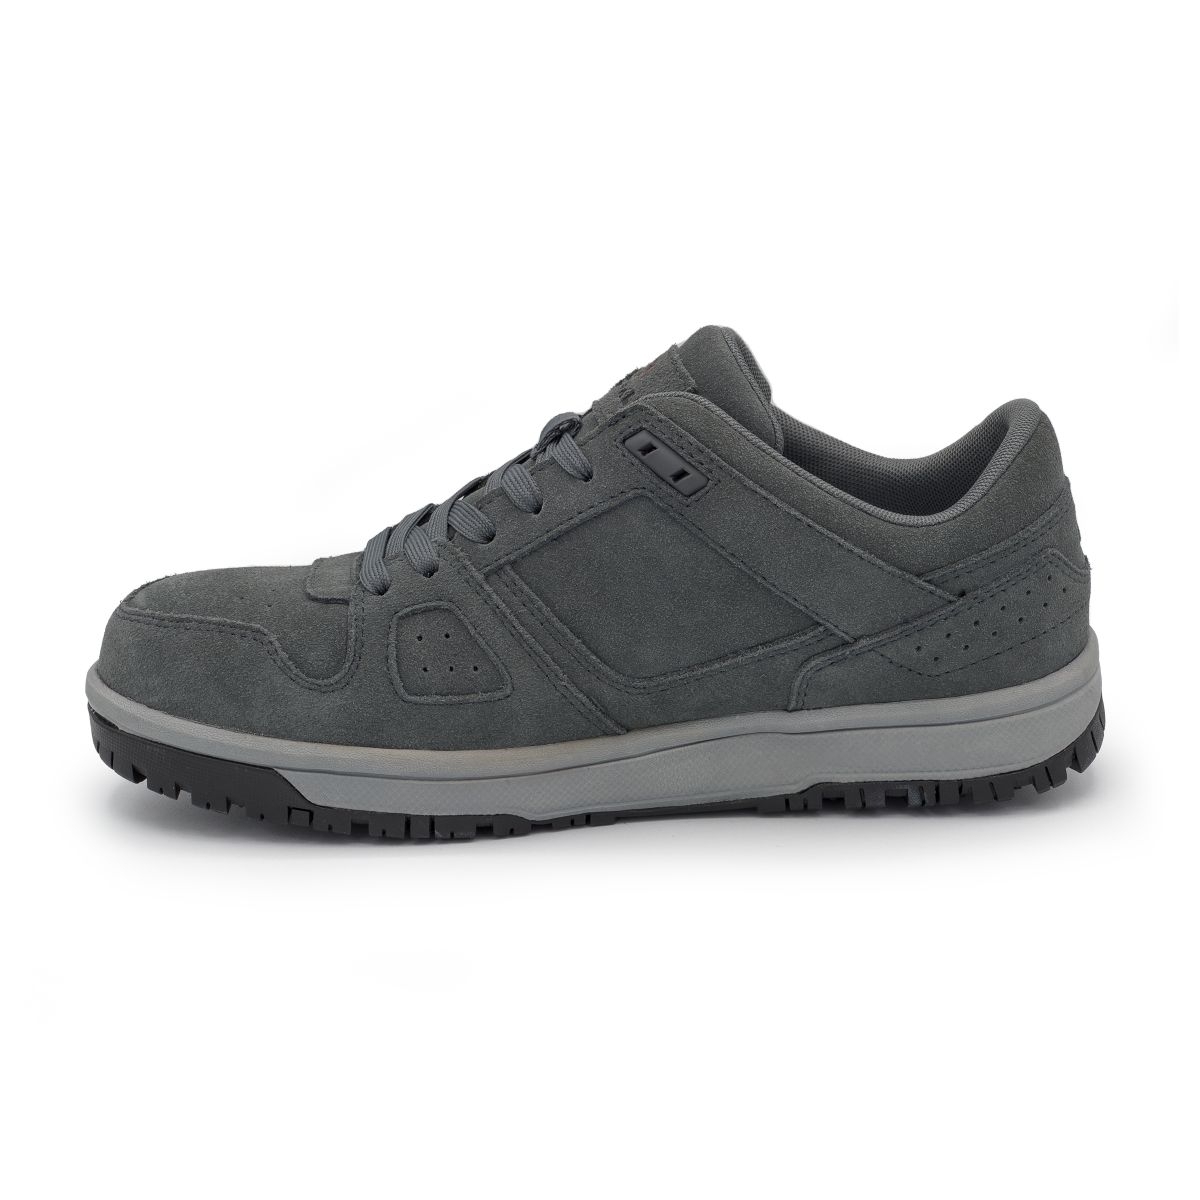 AIRWALK SAFETY Men's Mongo Composite Toe EH Work Shoe Charcoal/Grey - AW6301 CHARCOAL/GRAY - CHARCOAL/GRAY, 11-M